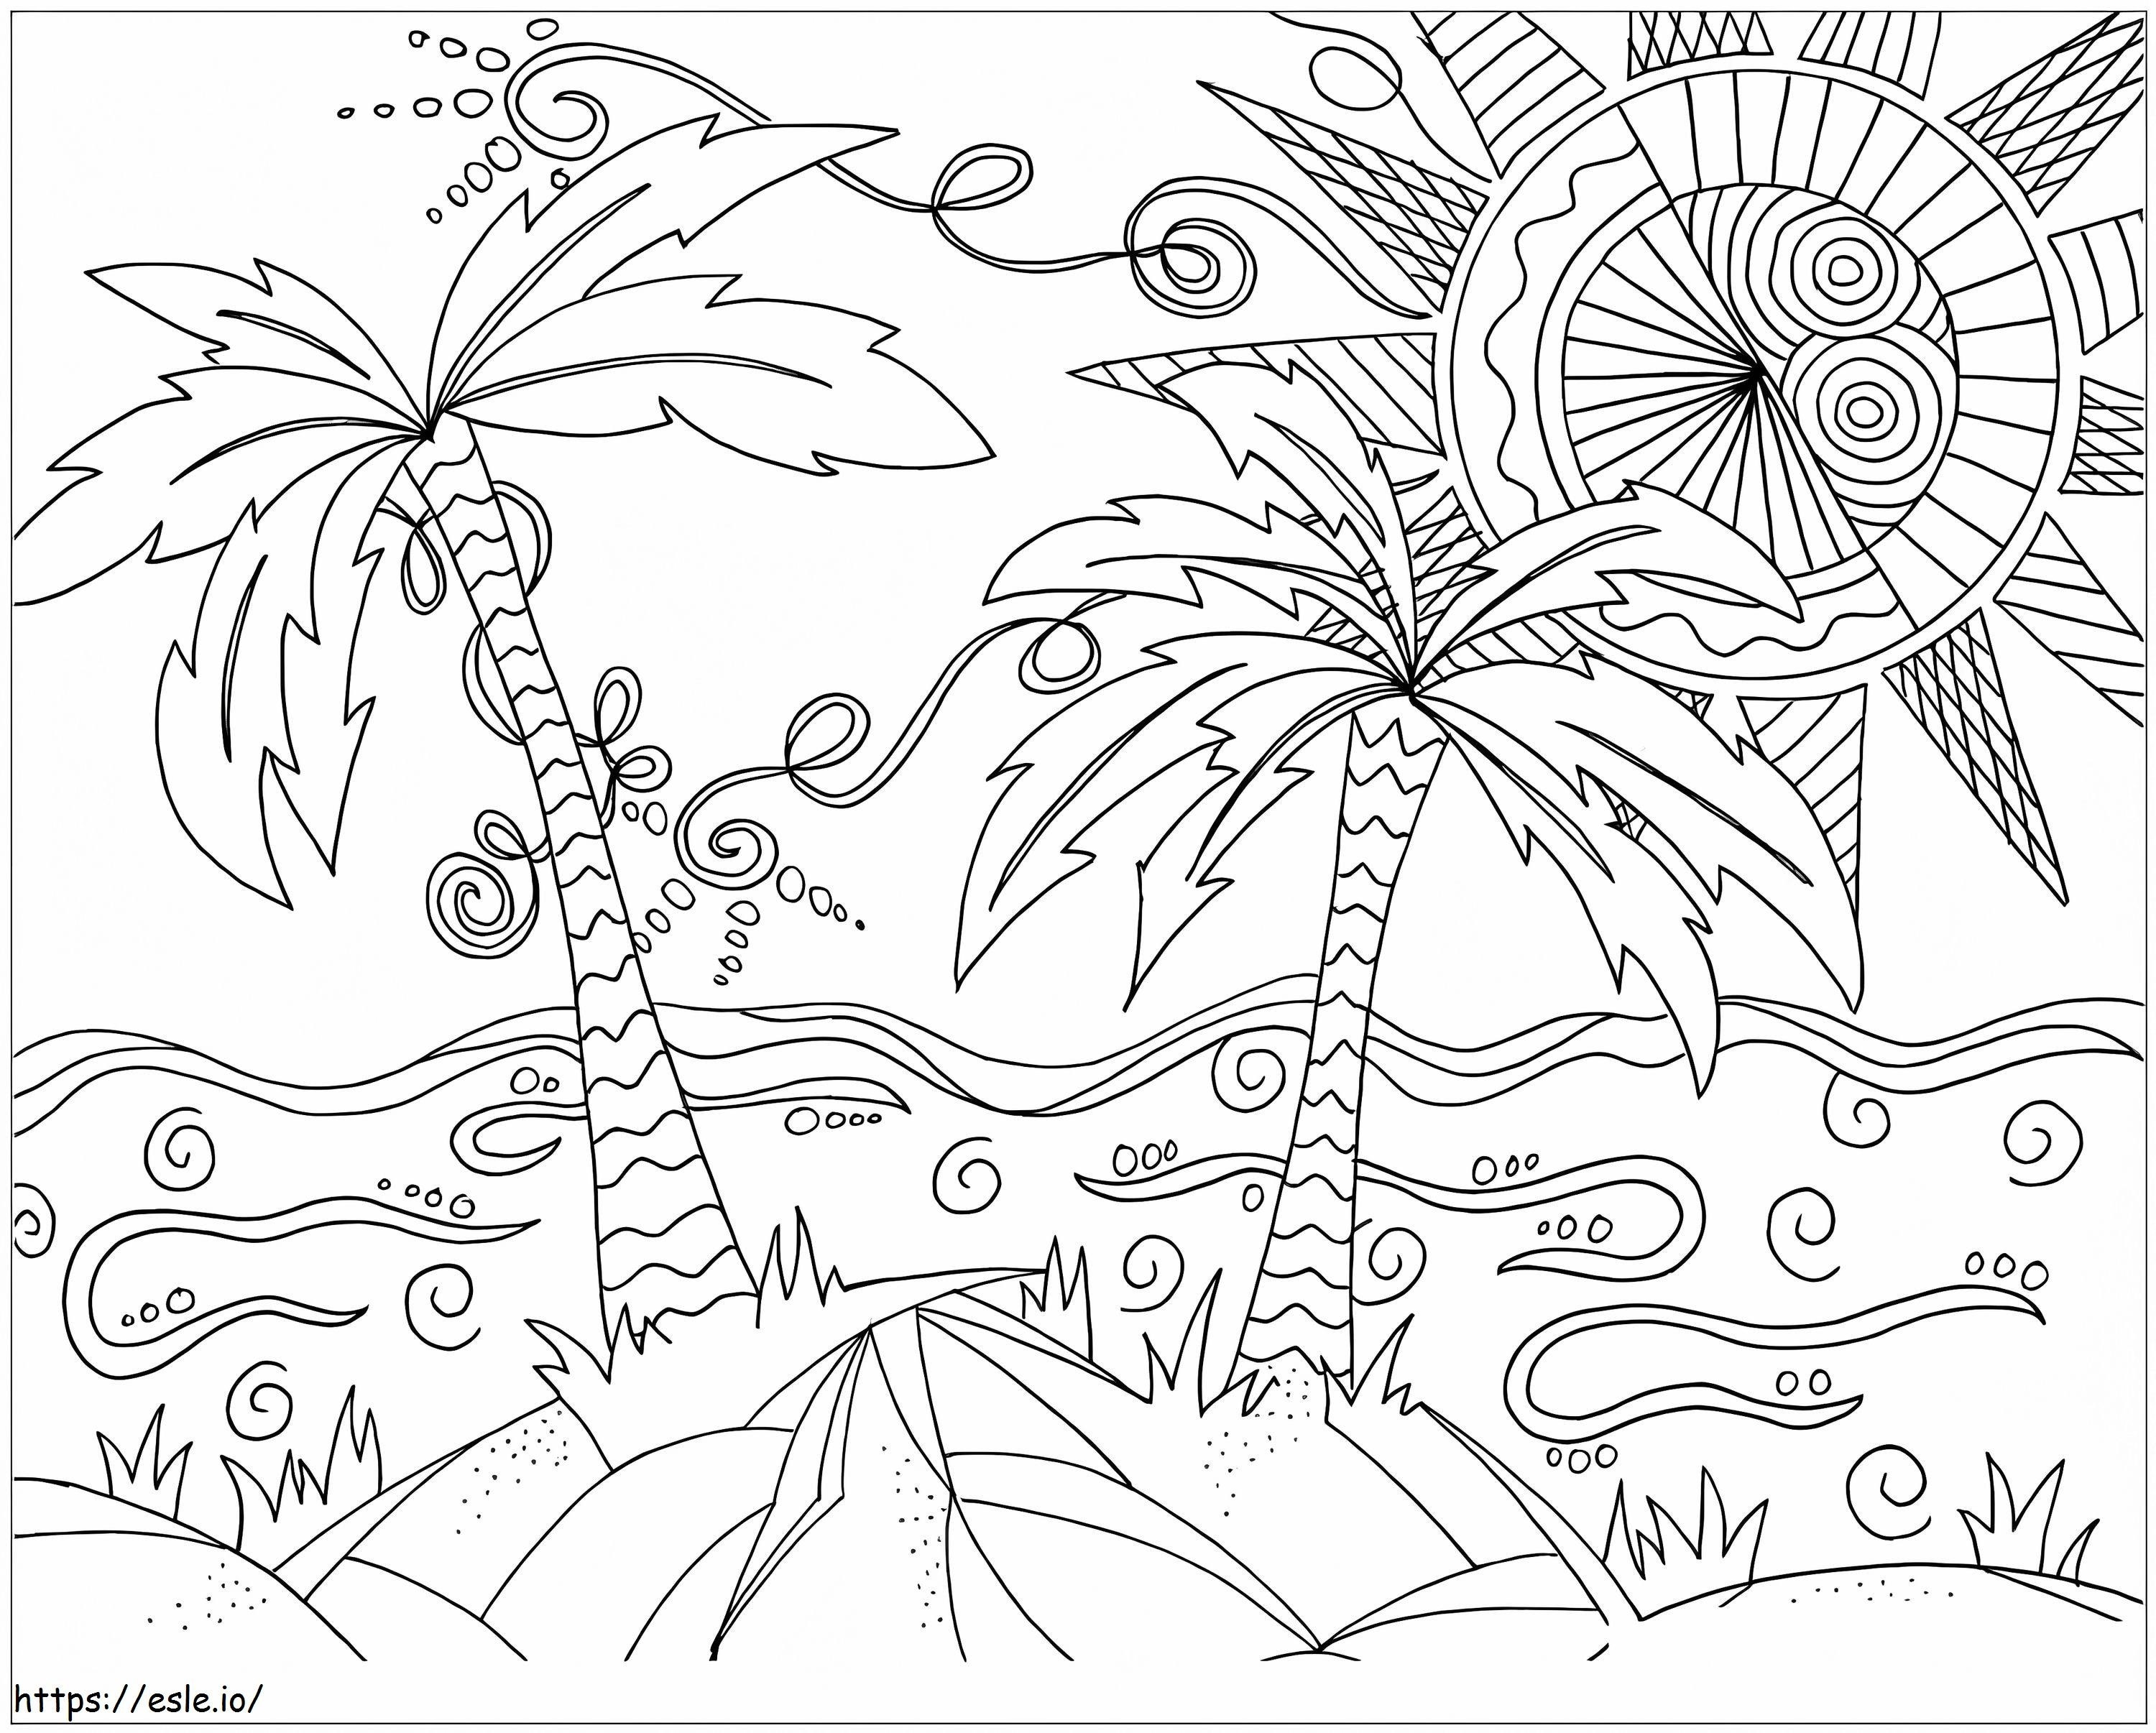 Beach Is For Adults coloring page